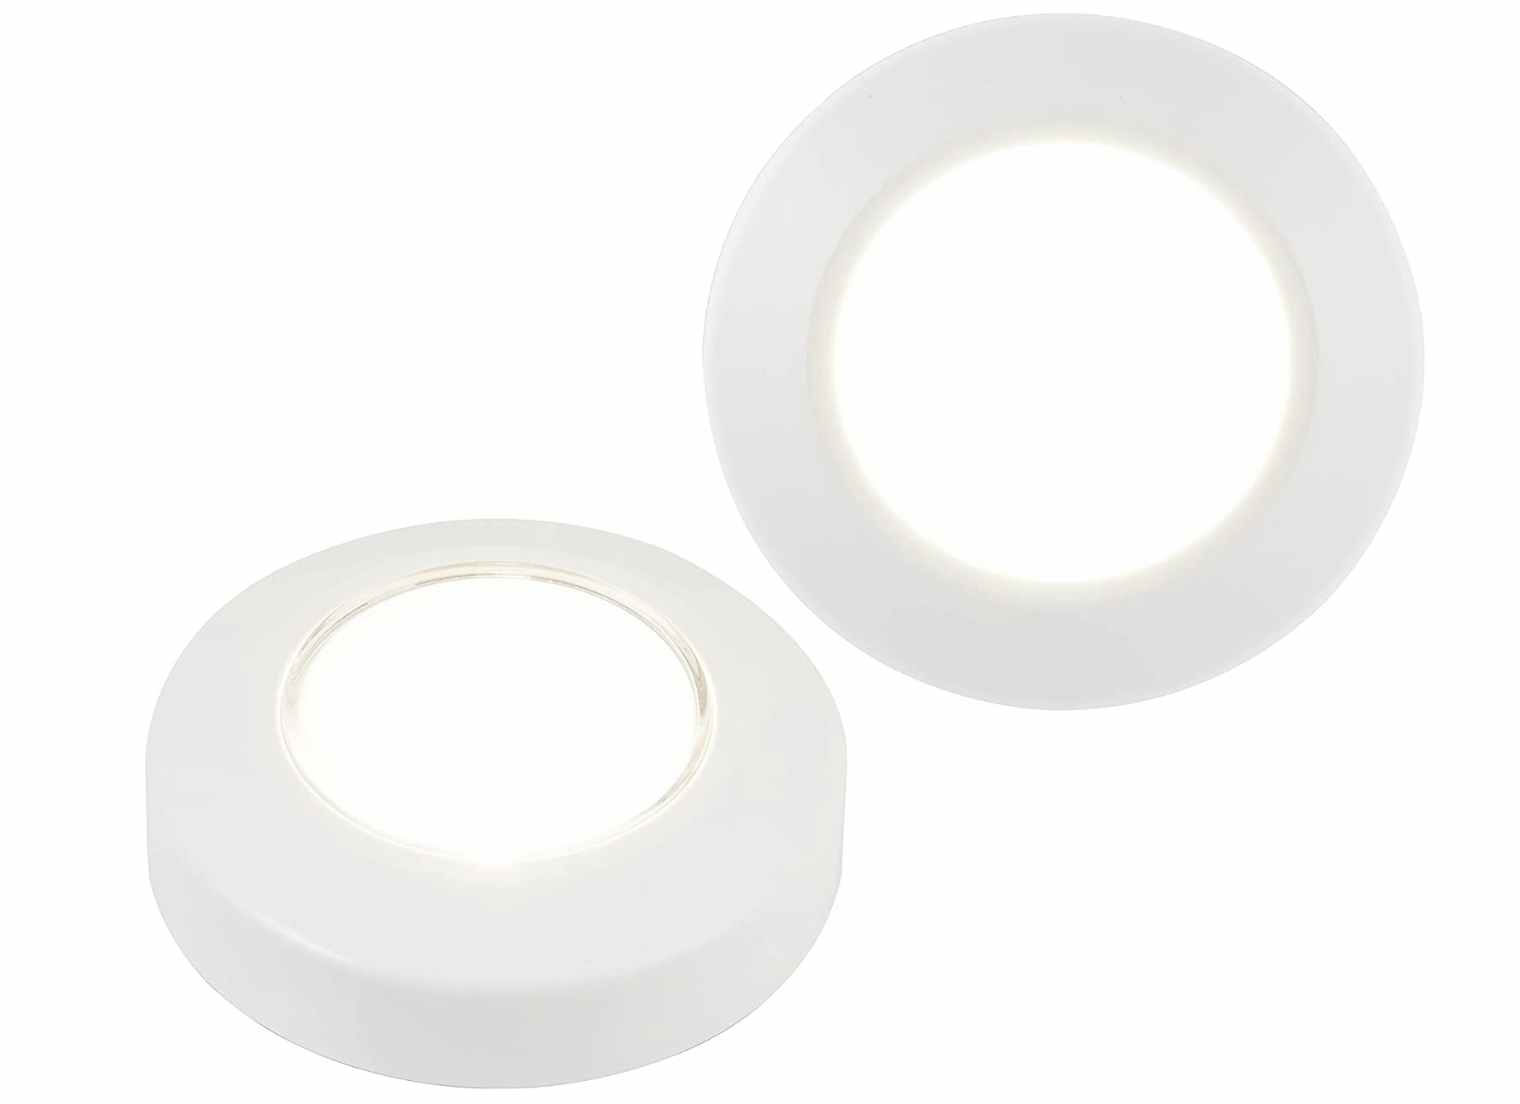 Two round LED lights on a white background